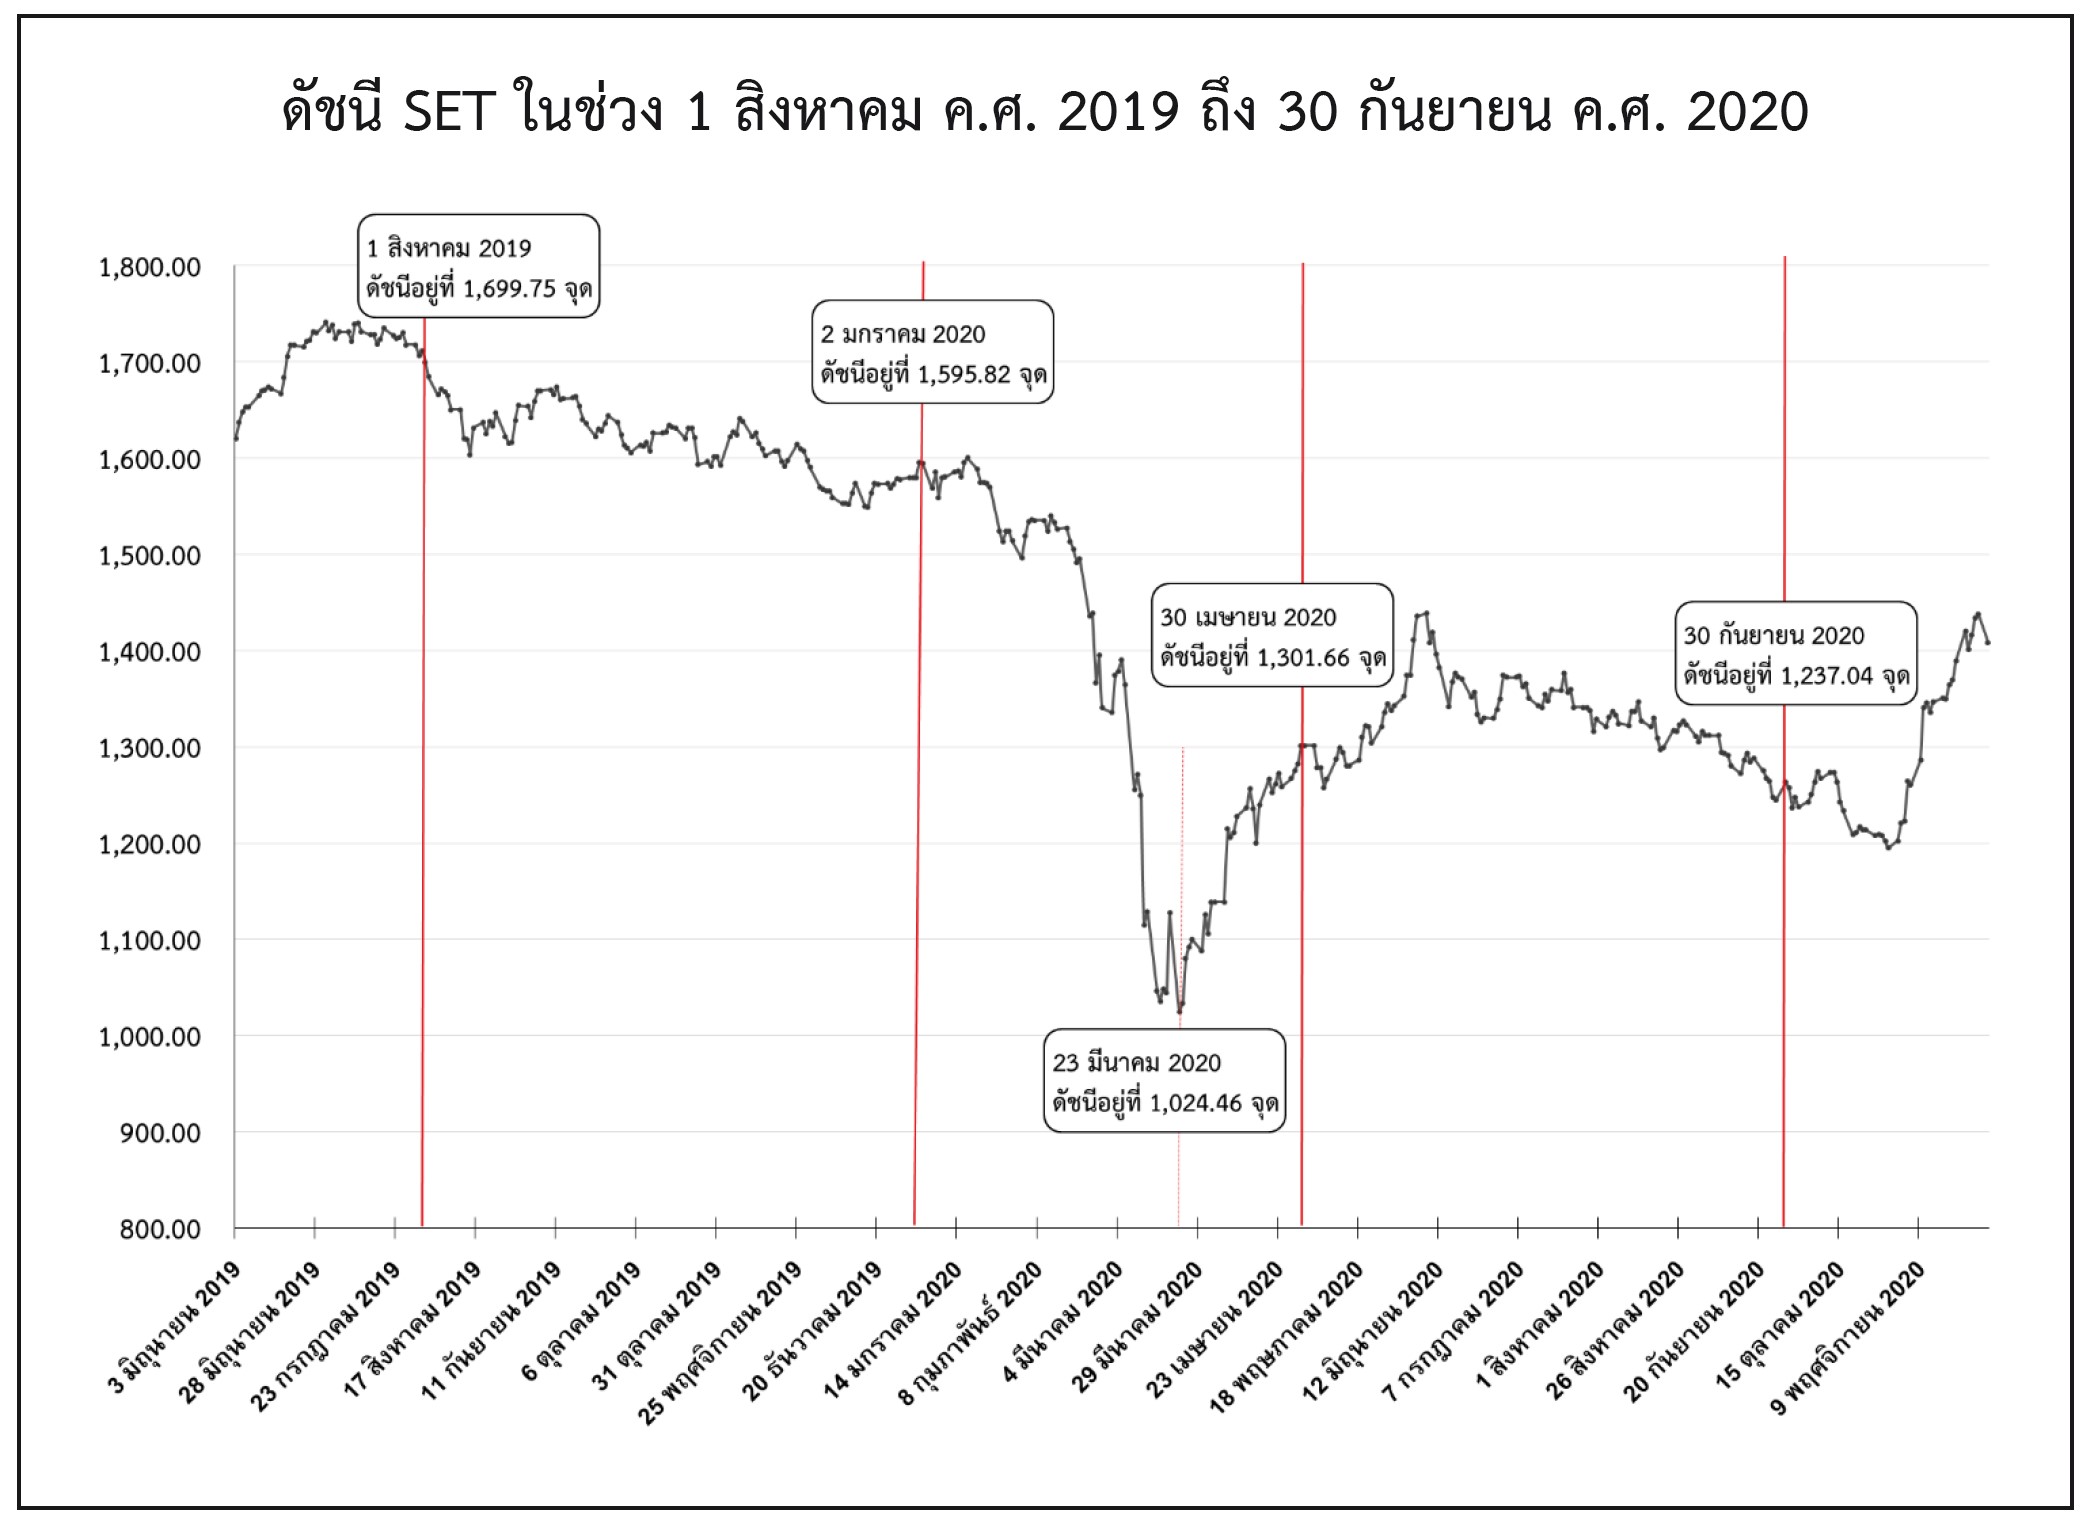 The performance of Thai equity mutual funds during the Covid-19 